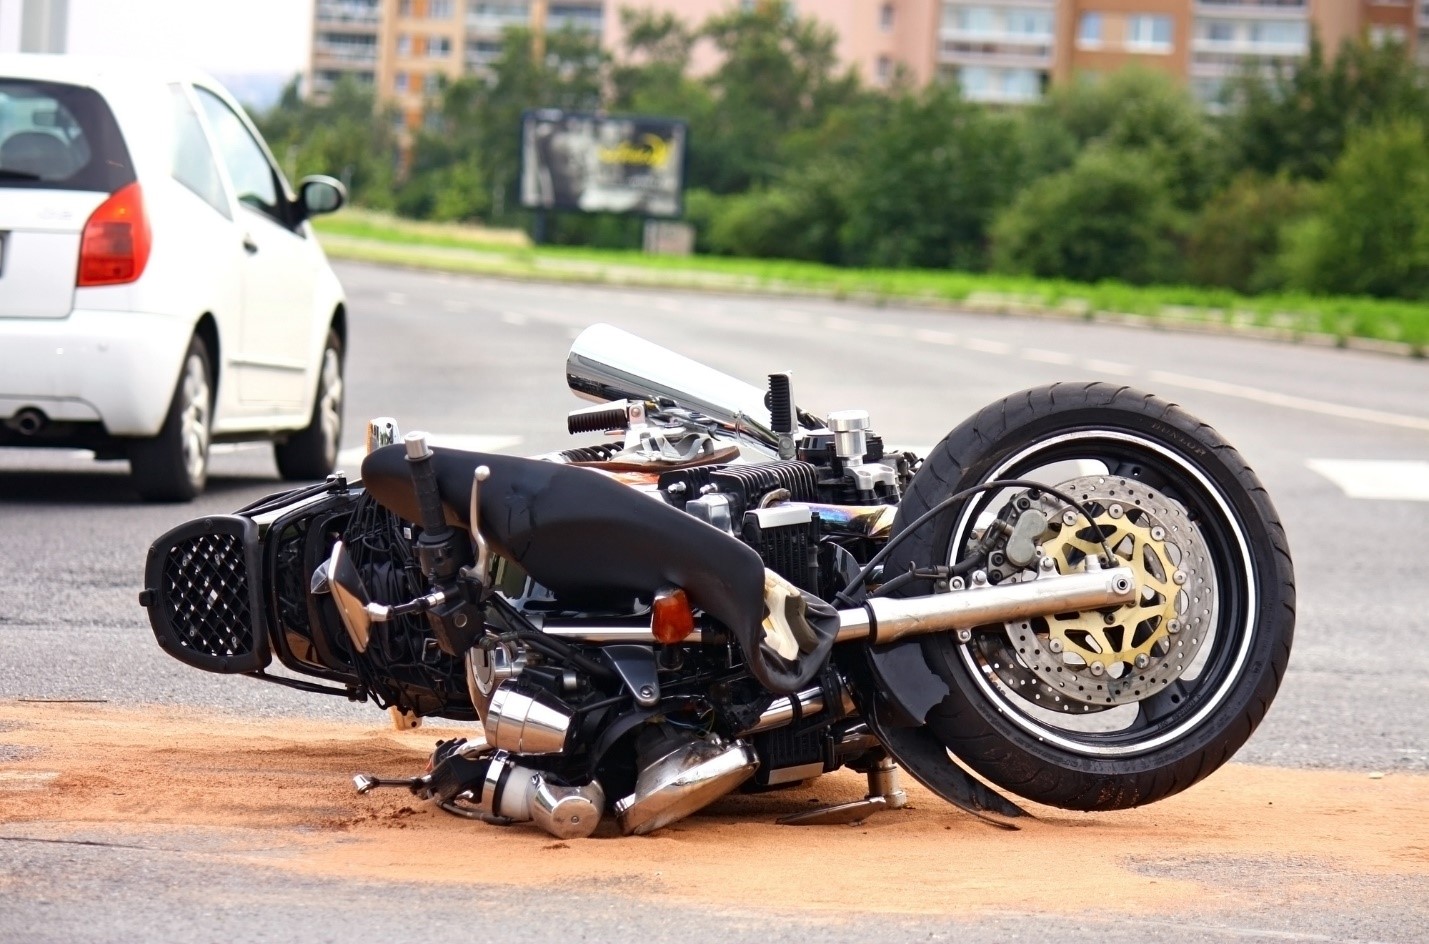 What are the most common motorcycle injuries?